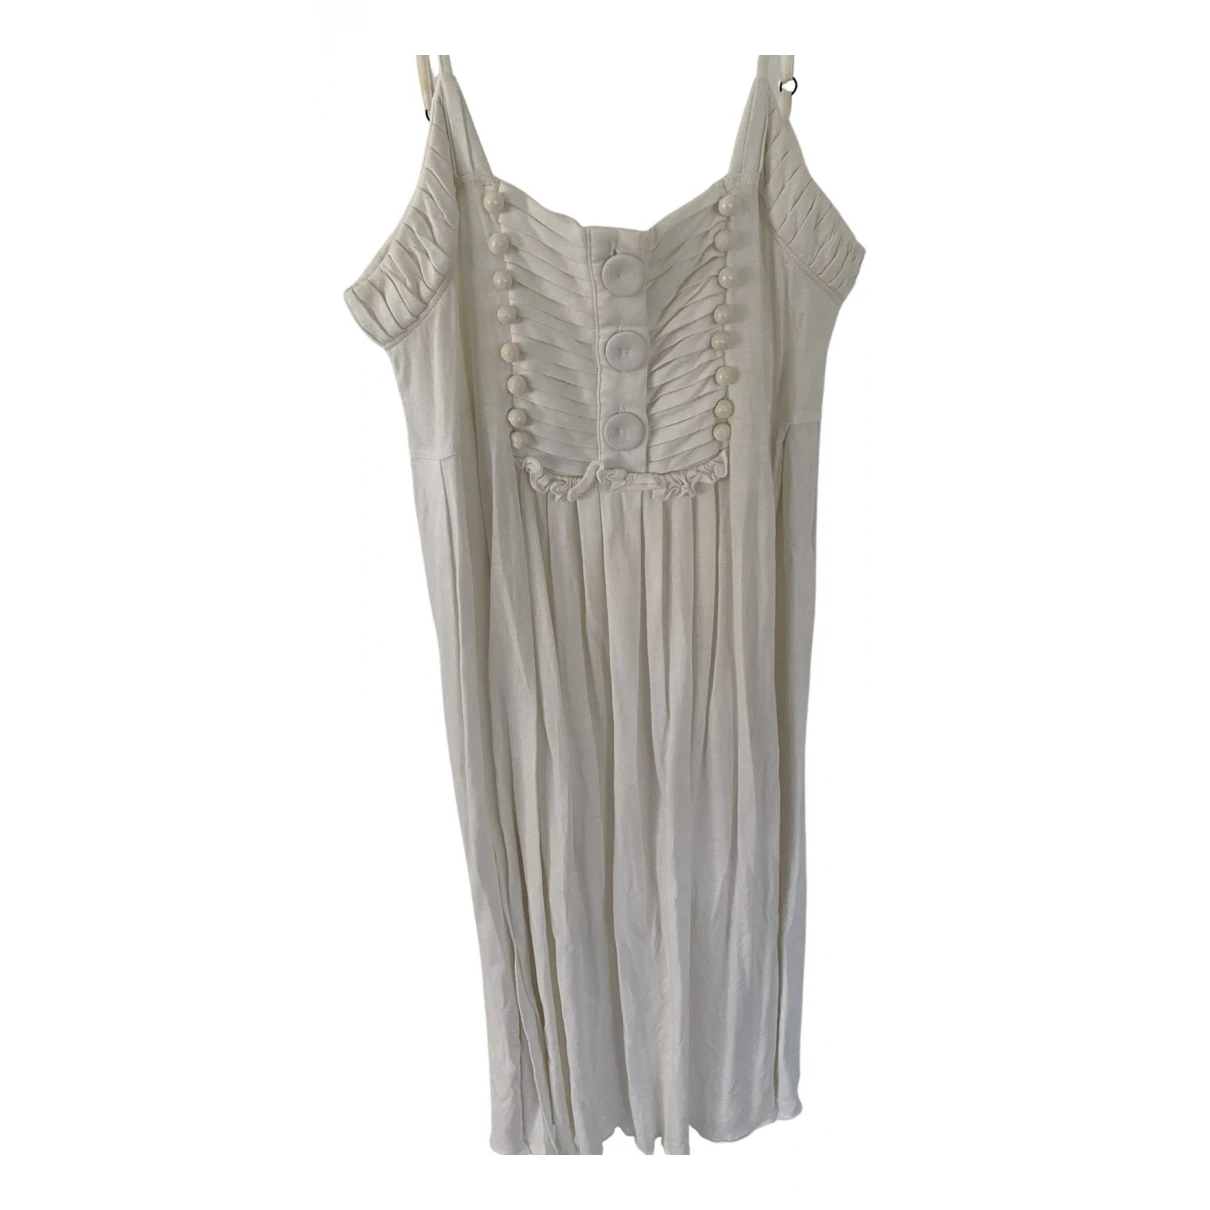 clothing See by Chloé dresses for Female Cotton 4 US. Used condition